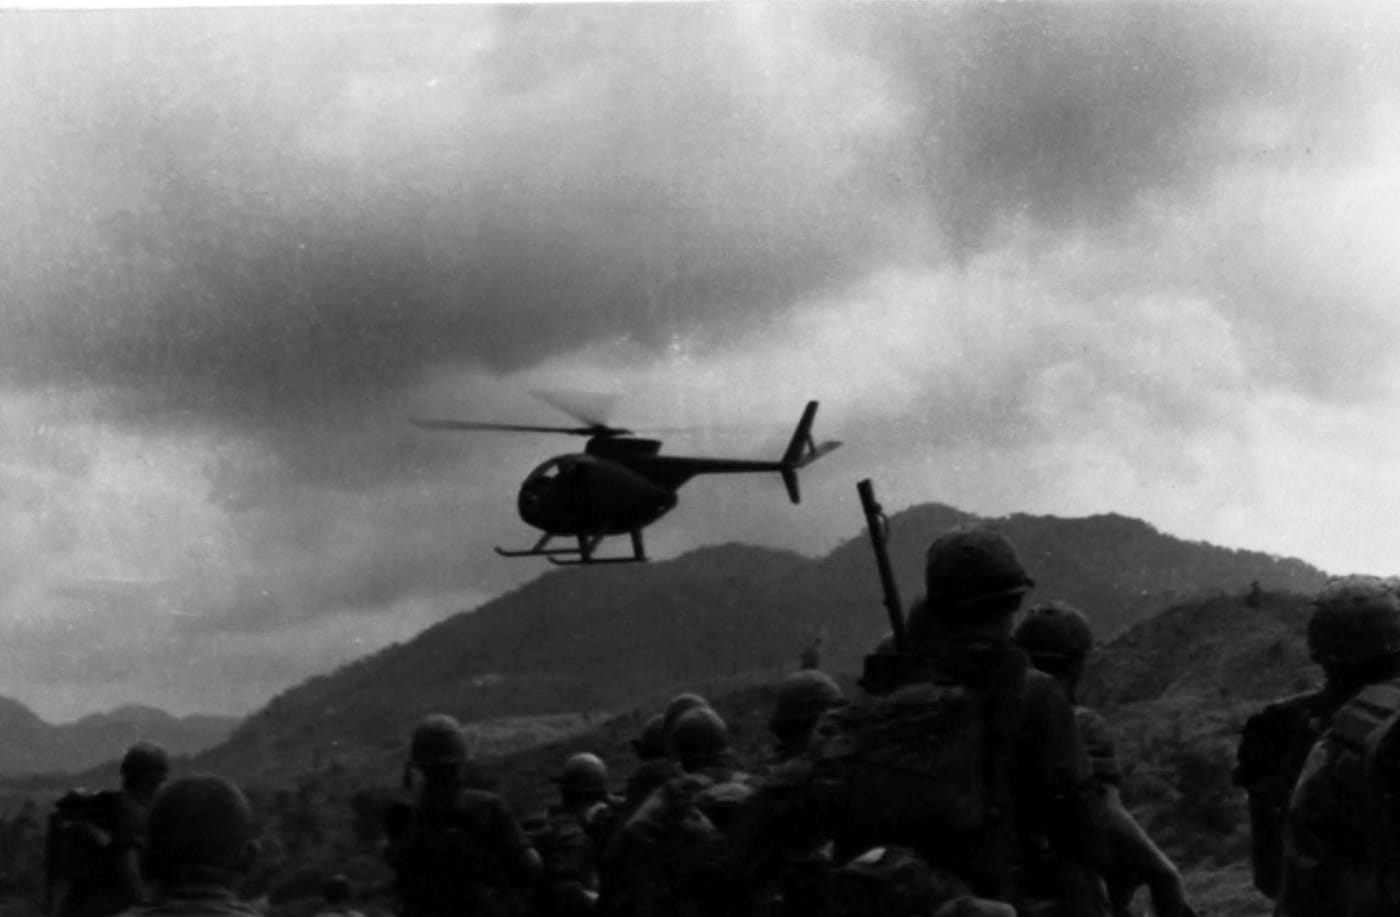 oh-6a cayuse helicopter operation pegasus vietnam us army first cavalry division april 1968